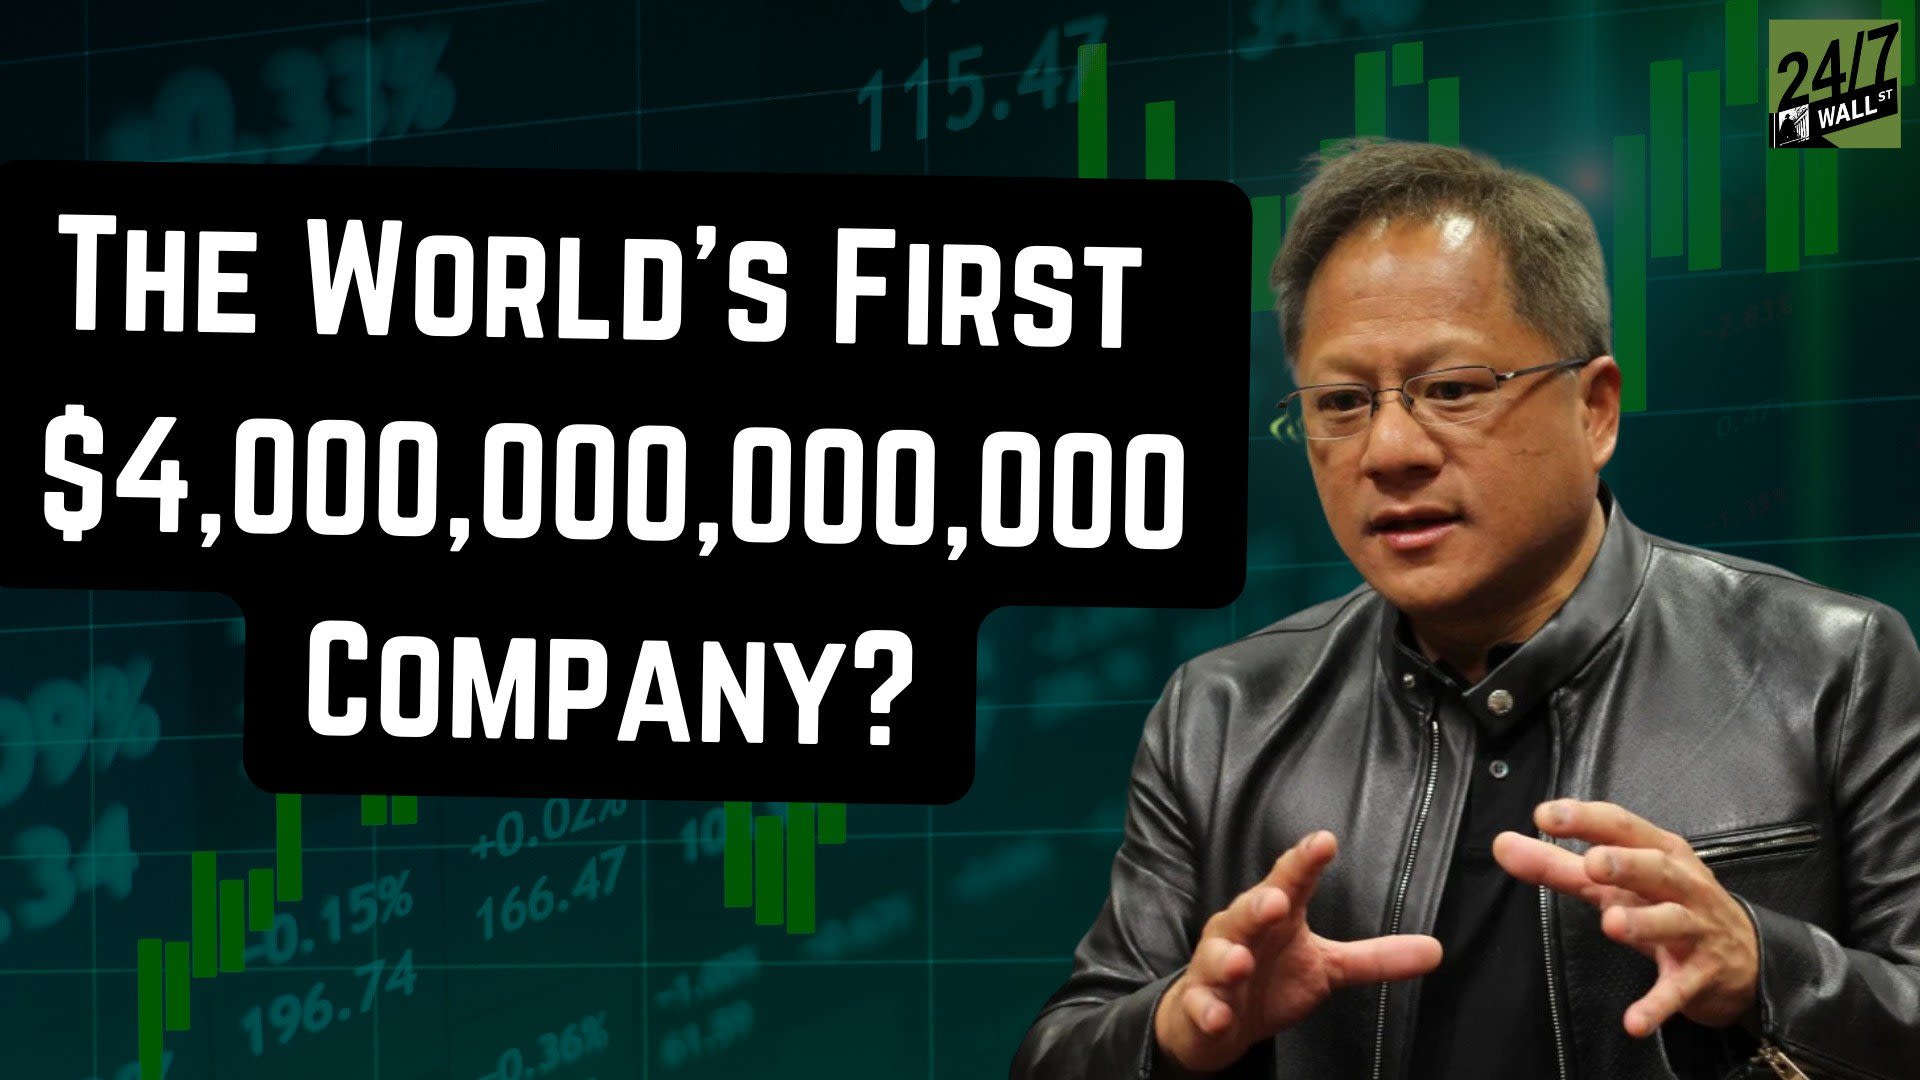 Will NVIDIA Pass Microsoft to Become the World’s Most Valuable Company?